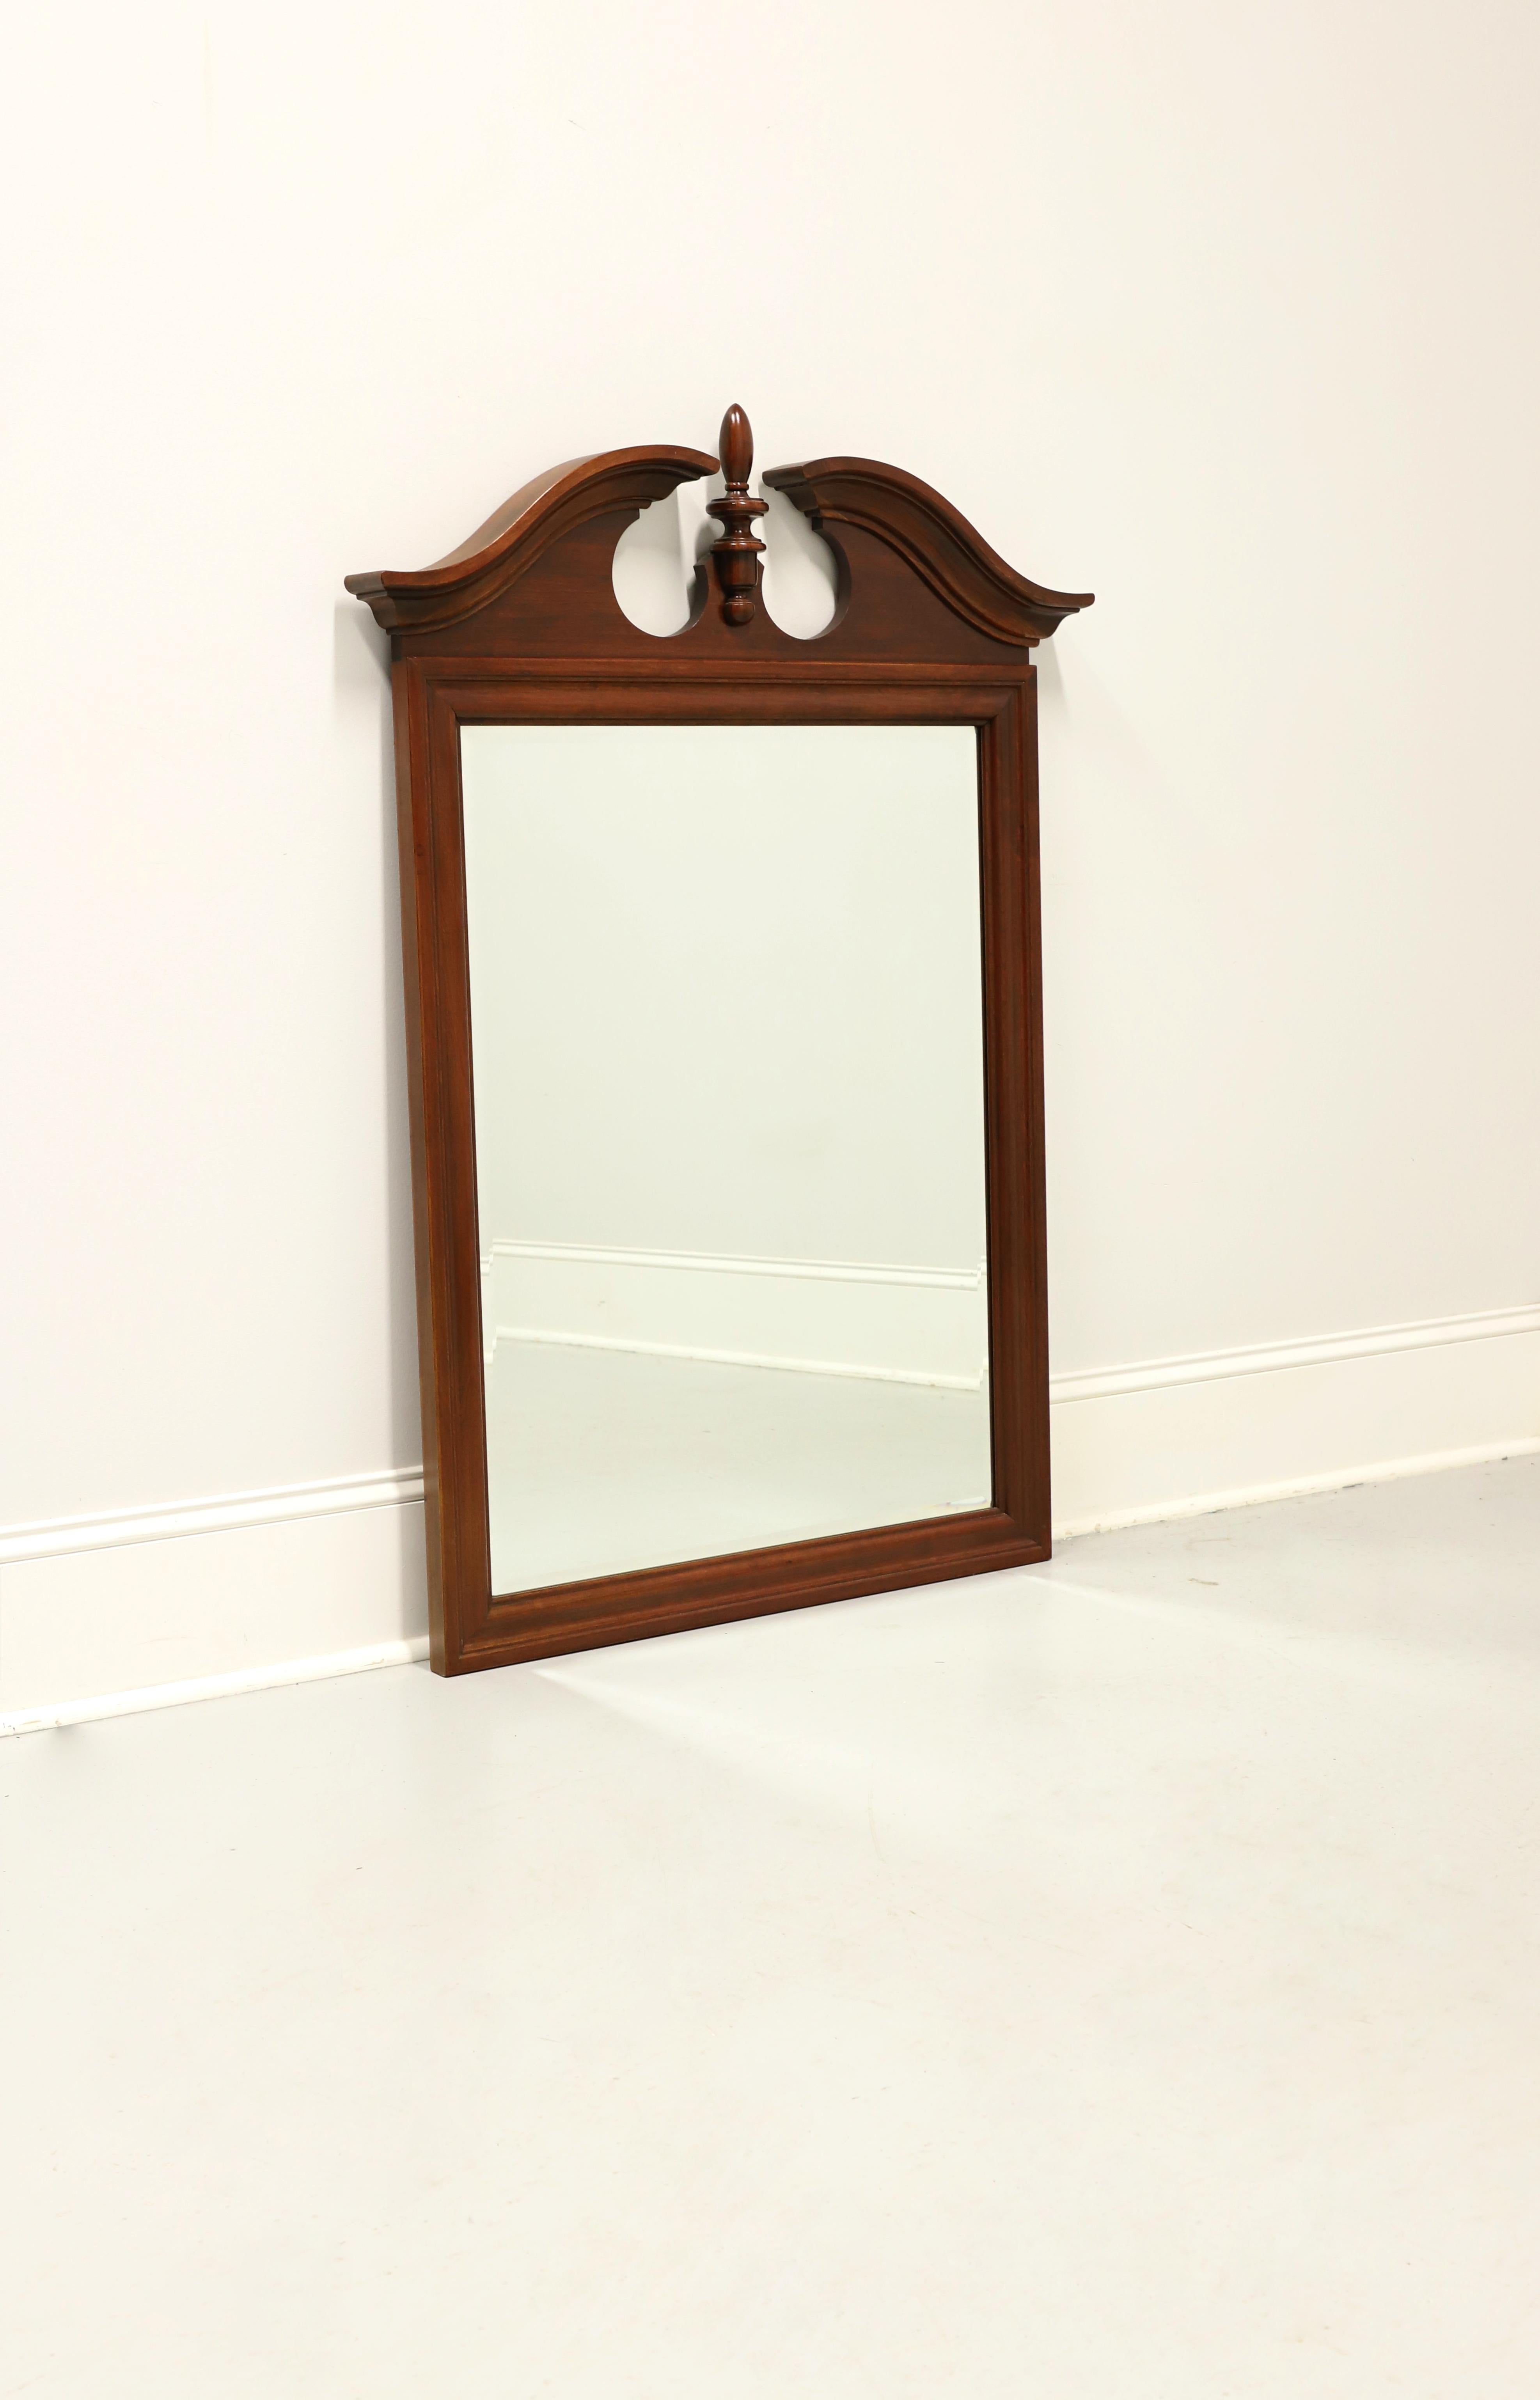 A Chippendale style wall or dresser mirror by Jamestown Sterling. Beveled mirrored glass, distressed pecan frame with pediment and center finial to top. Made in Lenoir, North Carolina, USA, in the late 20th century.

Style #: D-7407

Measures: